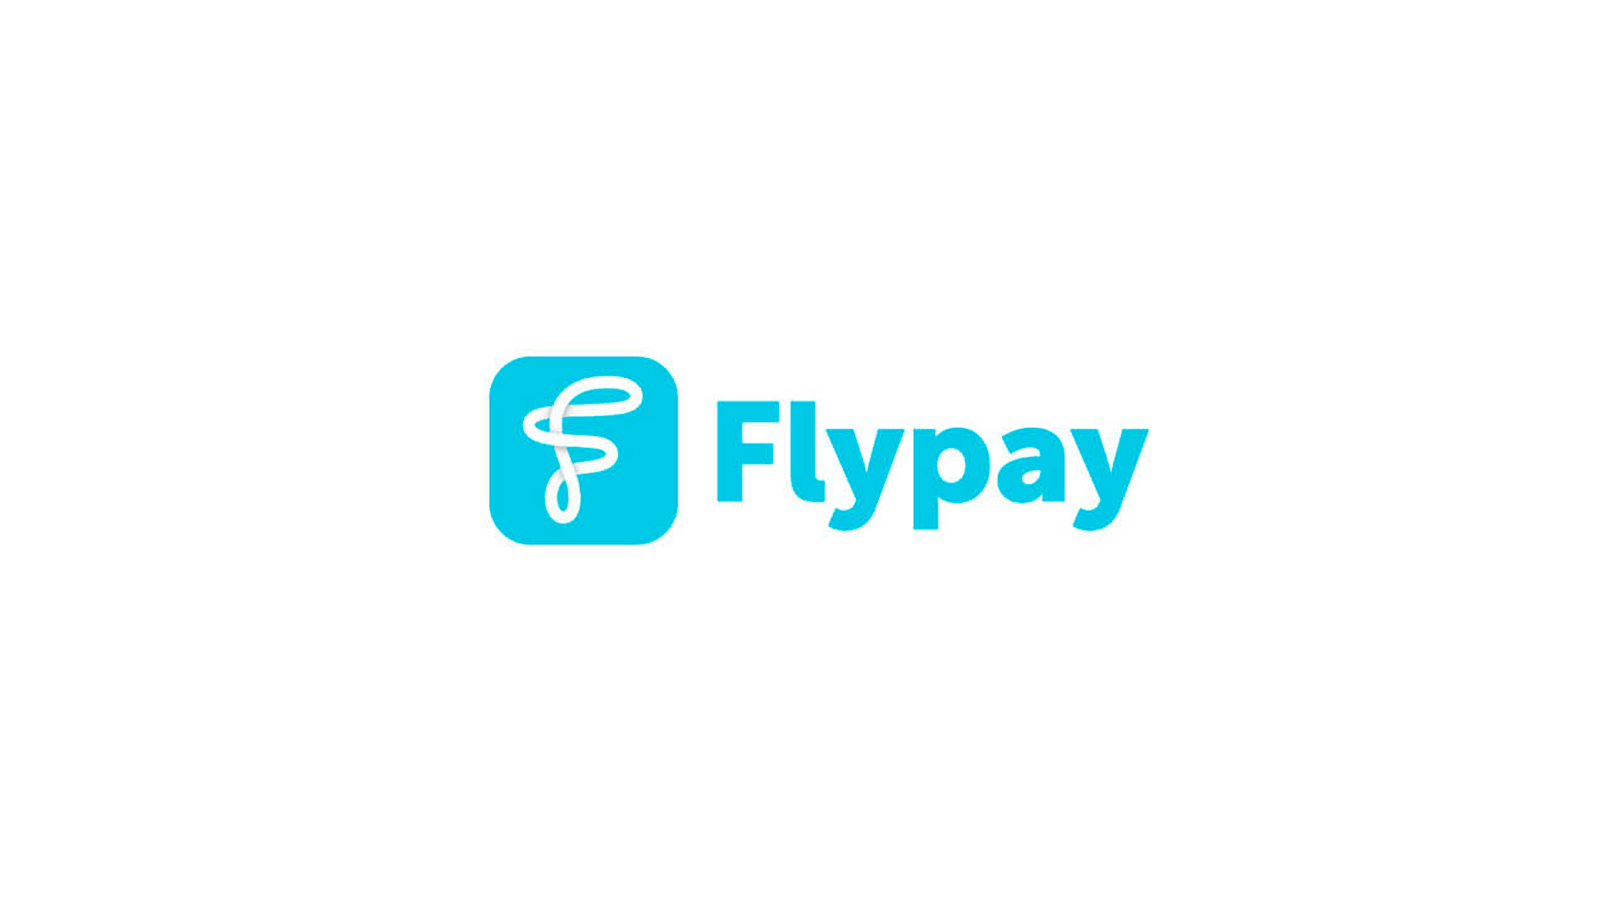 Partnership with Flypay to allow for digital voucher redemption